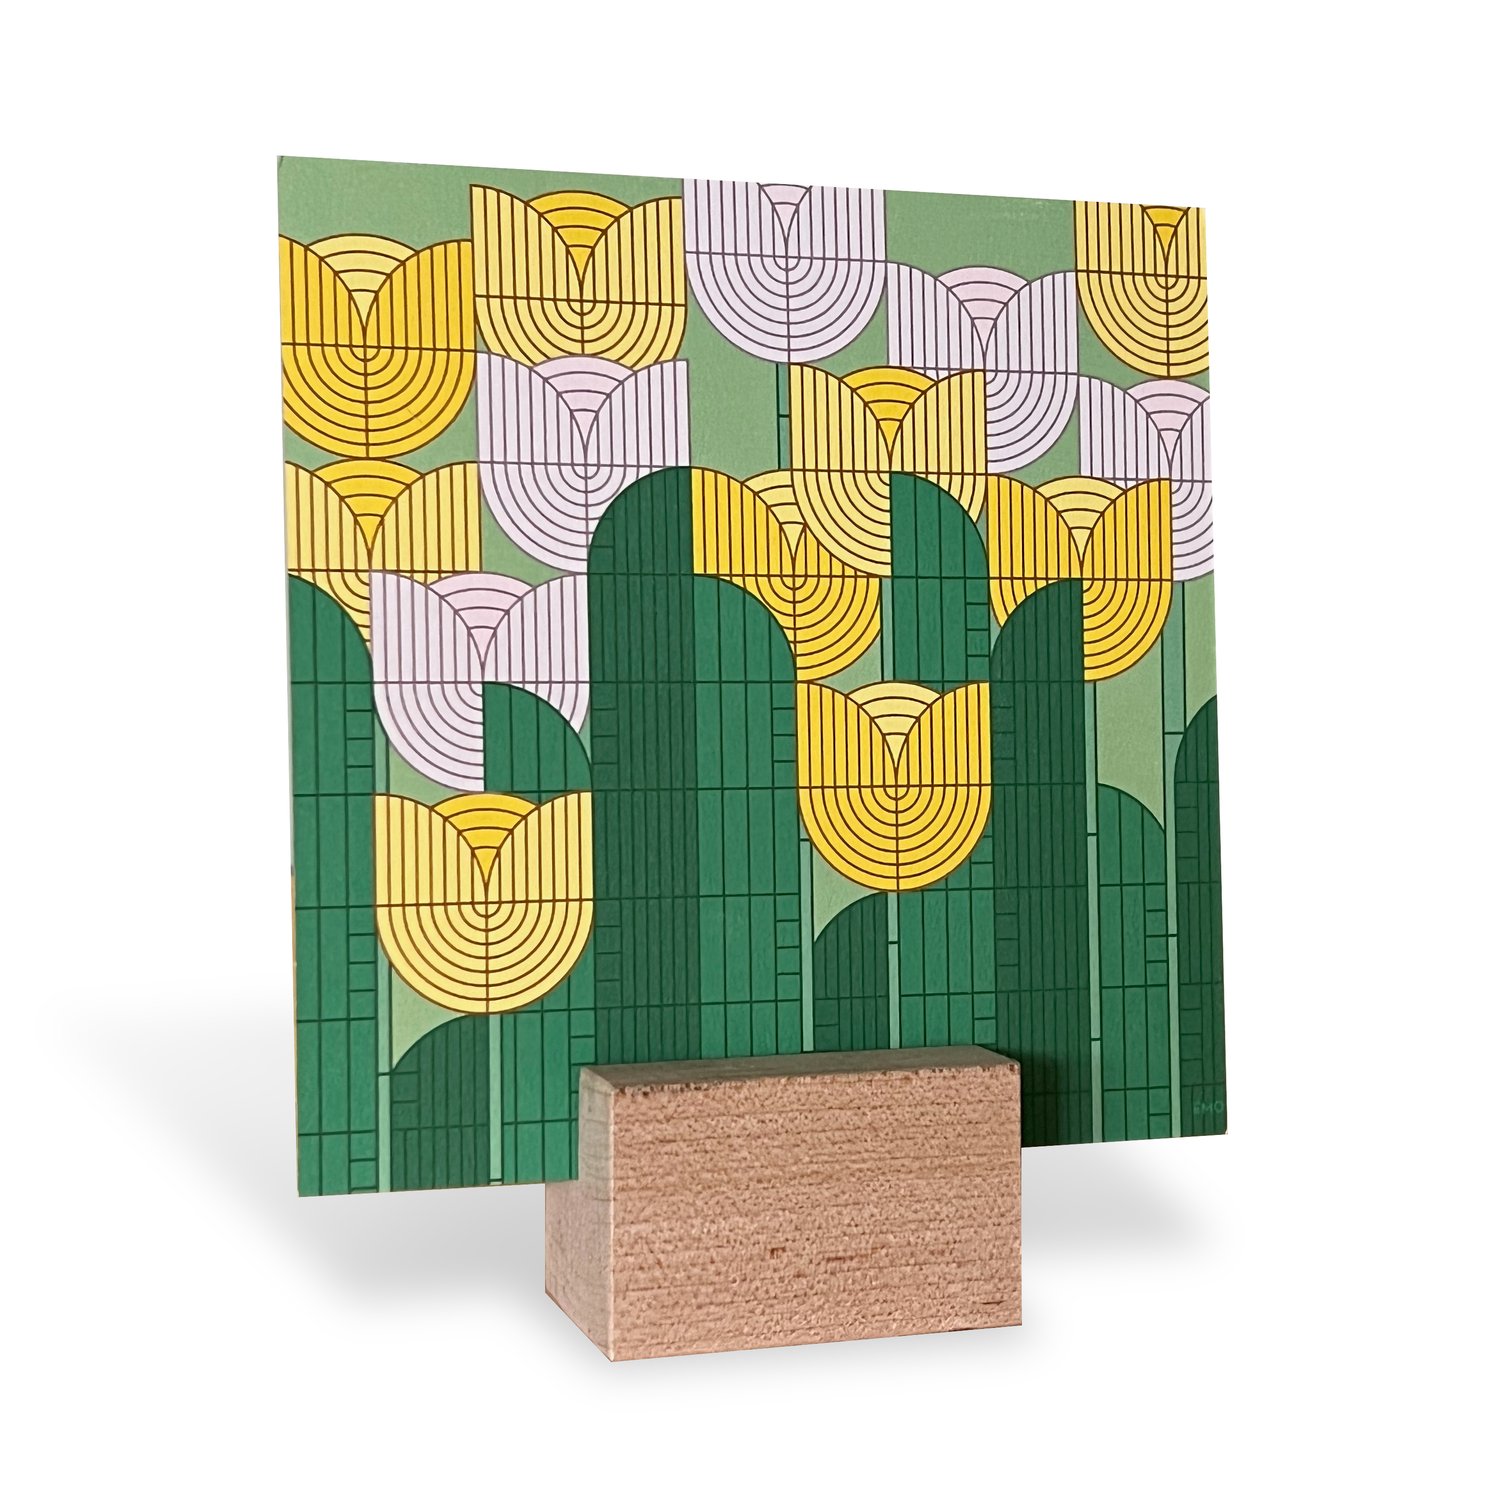 Image of "Spring Tulips" Art Card and Wood Block Easel